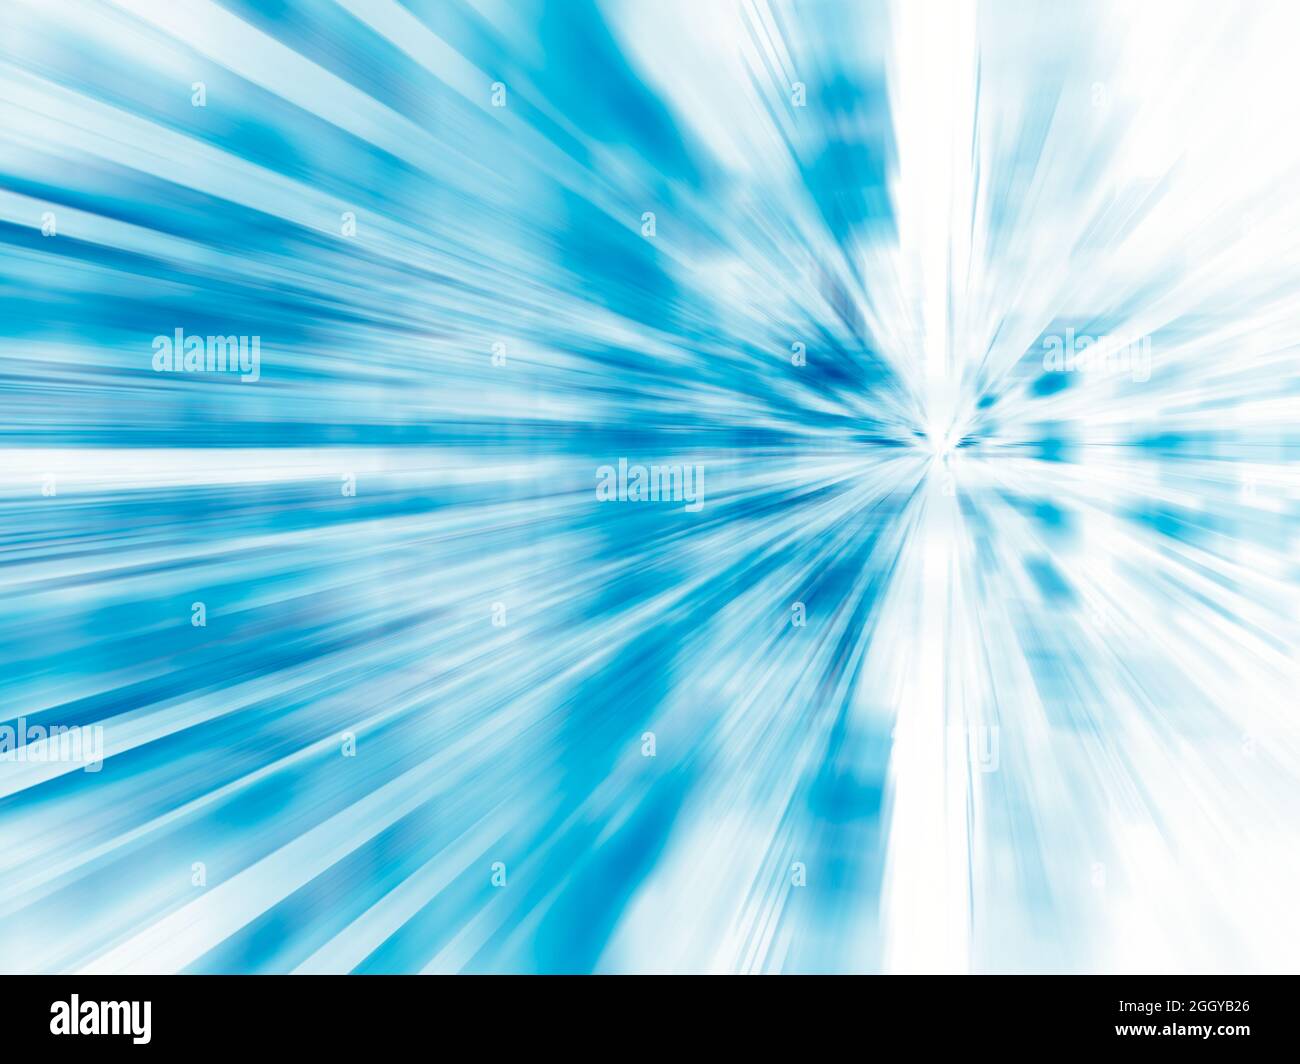 Simple white and blue background with motion blur effect- 3d illustration Stock Photo